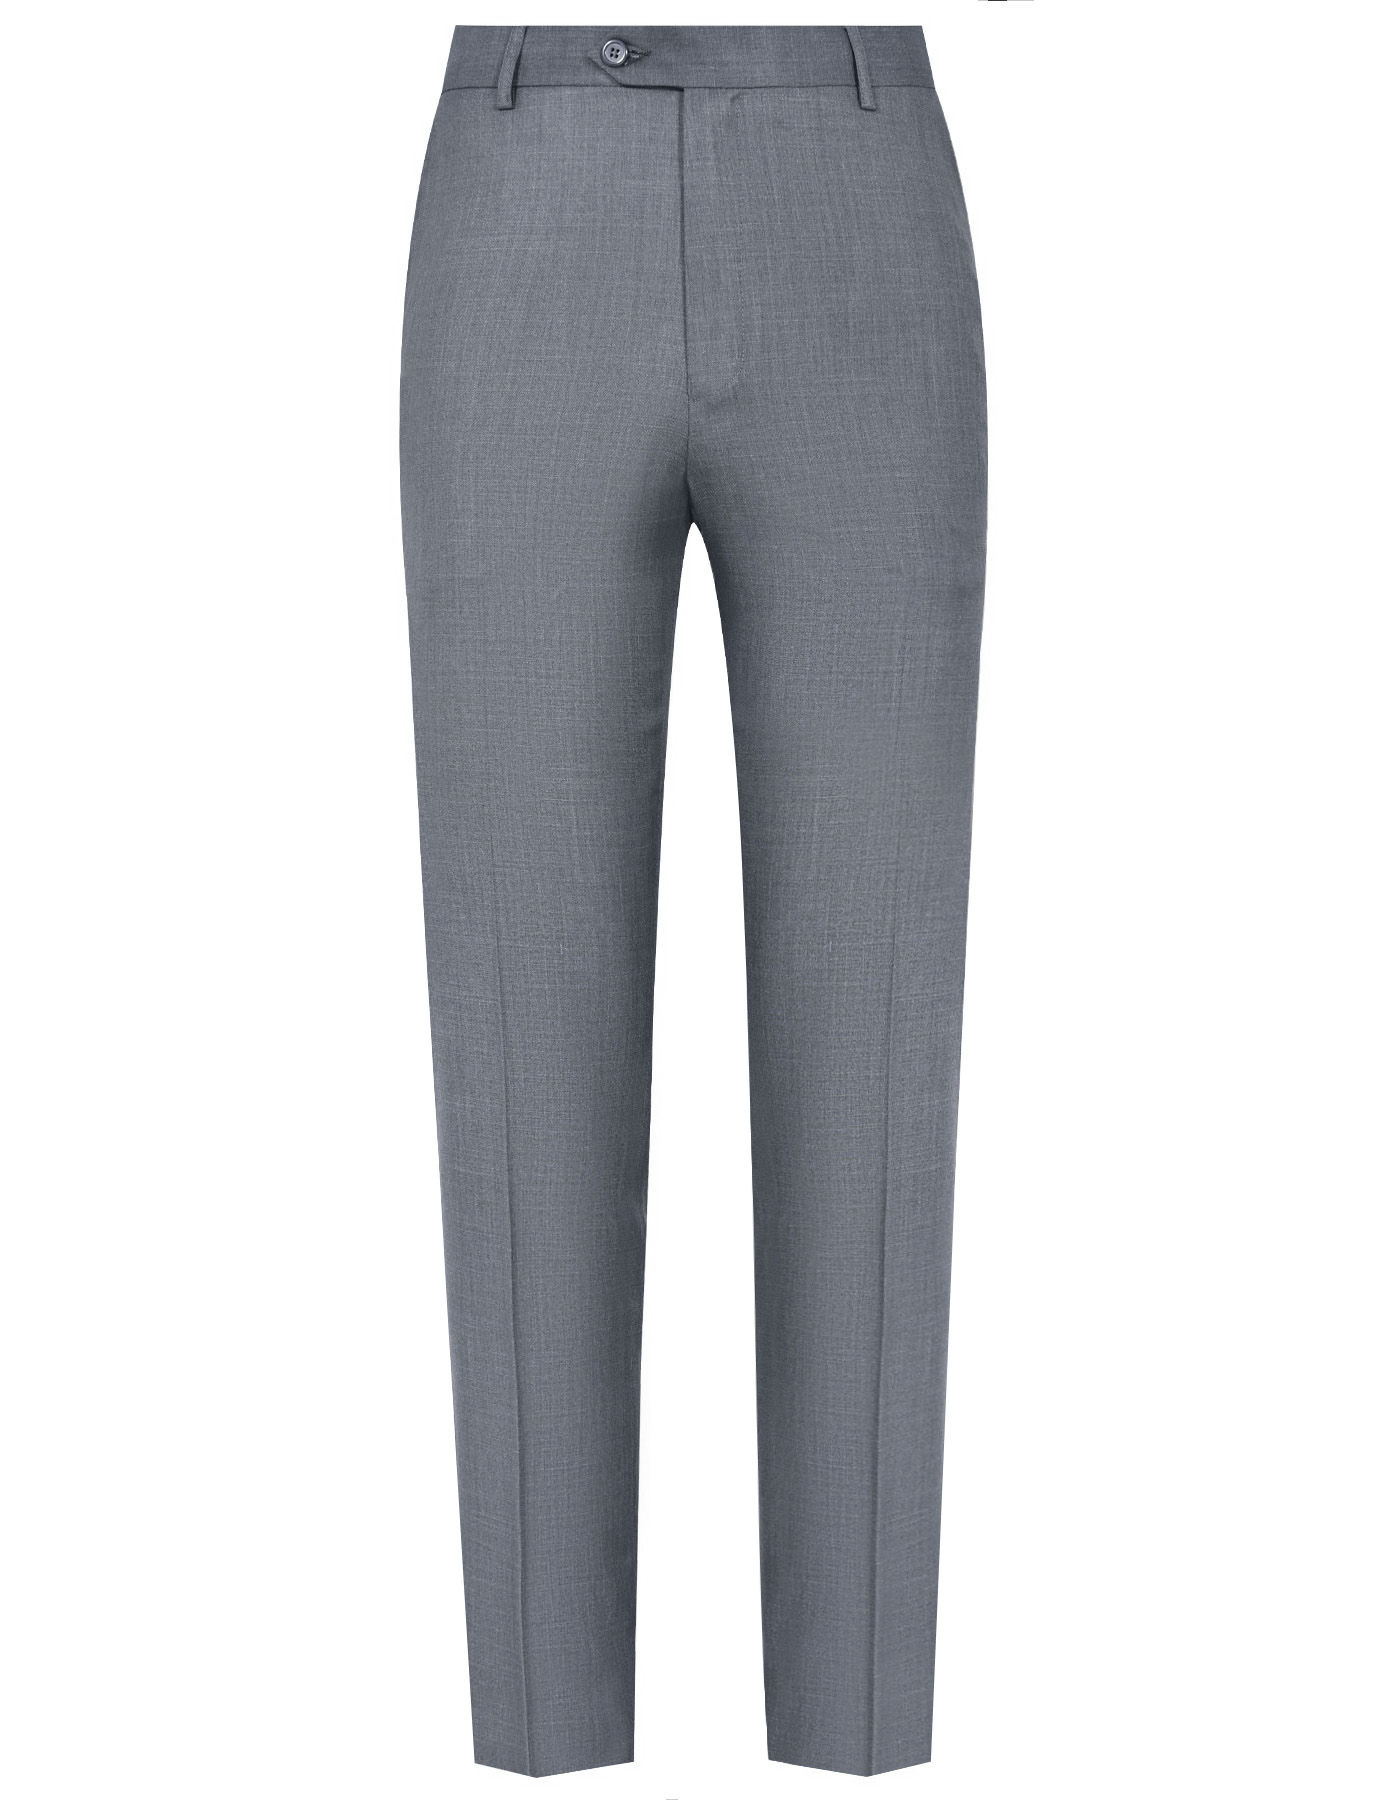 Grey Texture Formal Trouser